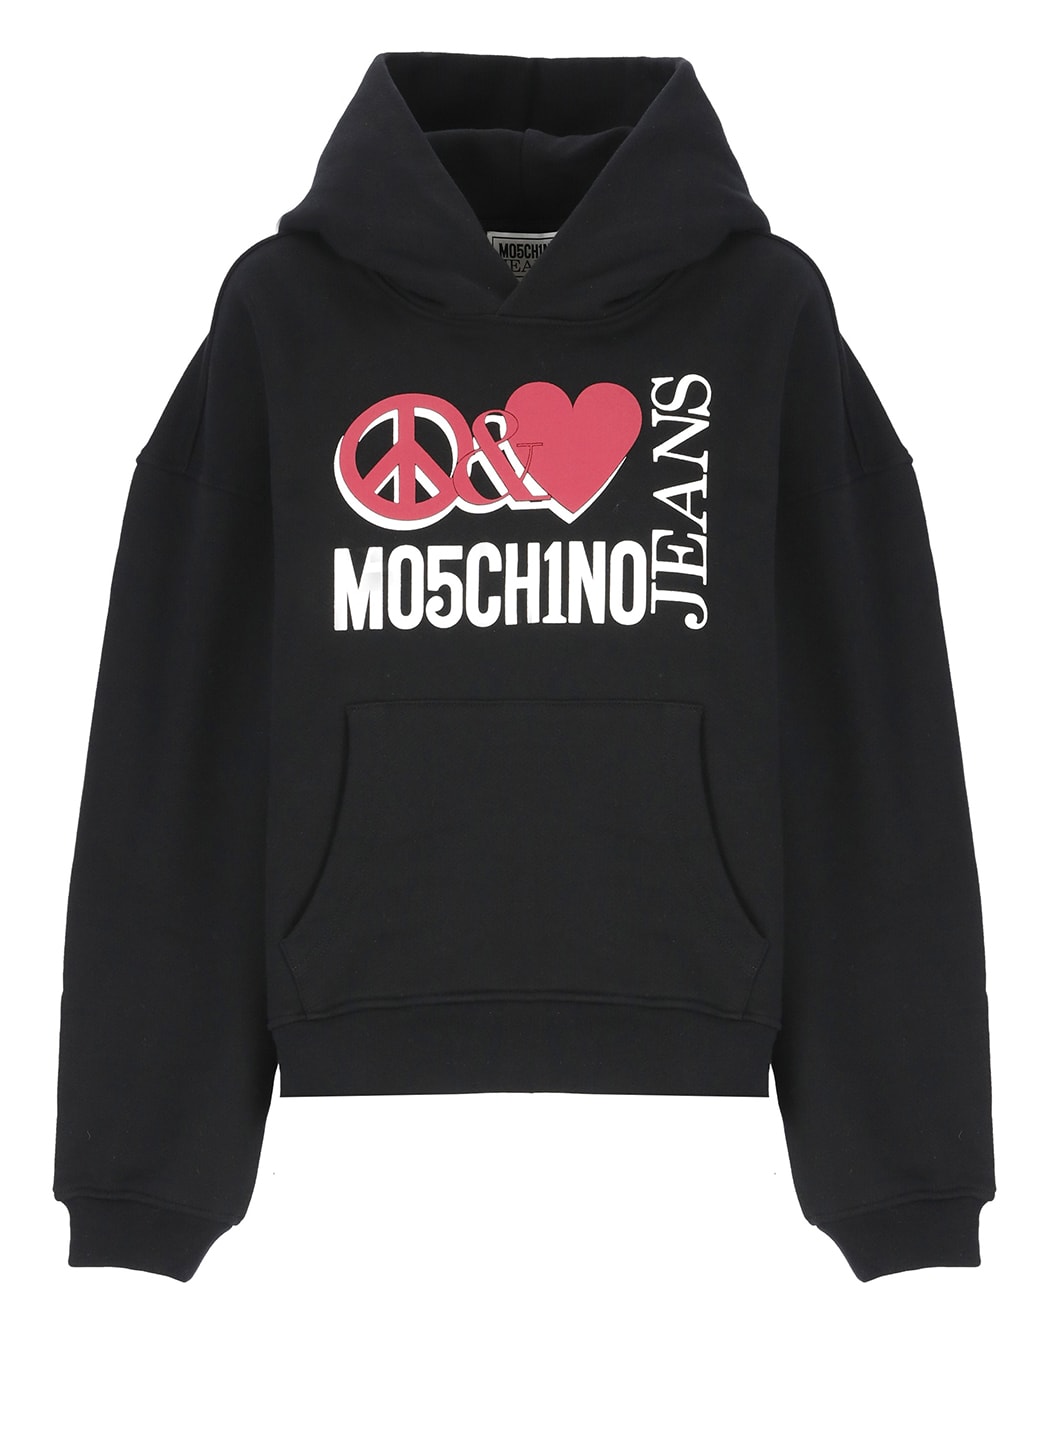 M05CH1N0 JEANS SWEATSHIRT WITH PEACE AND LOVE LOGO